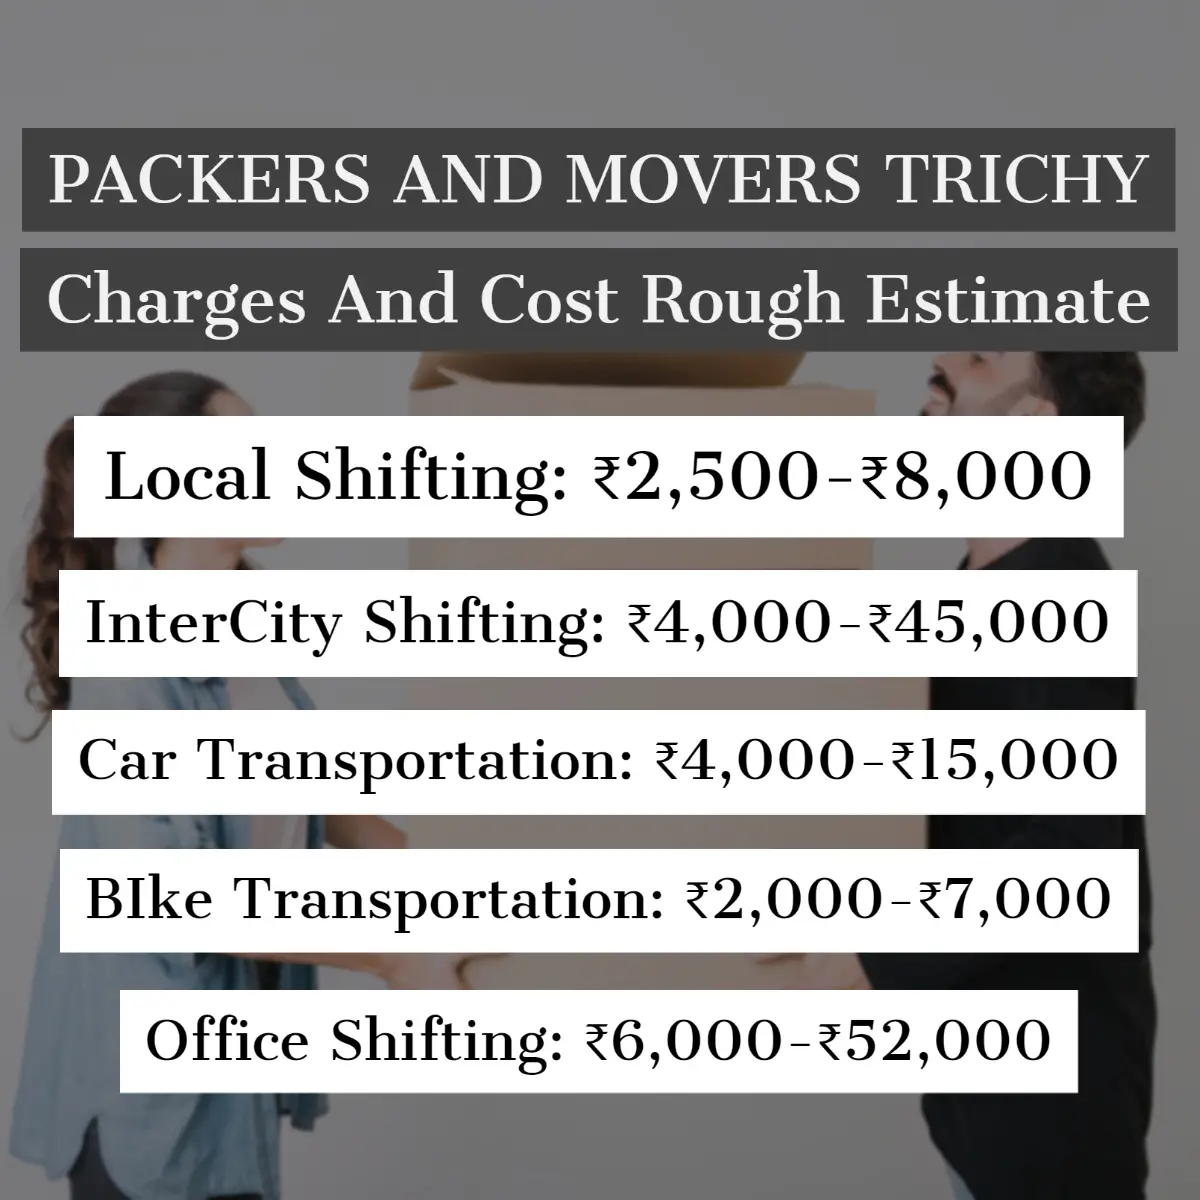 Packers and Movers Trichy Charges